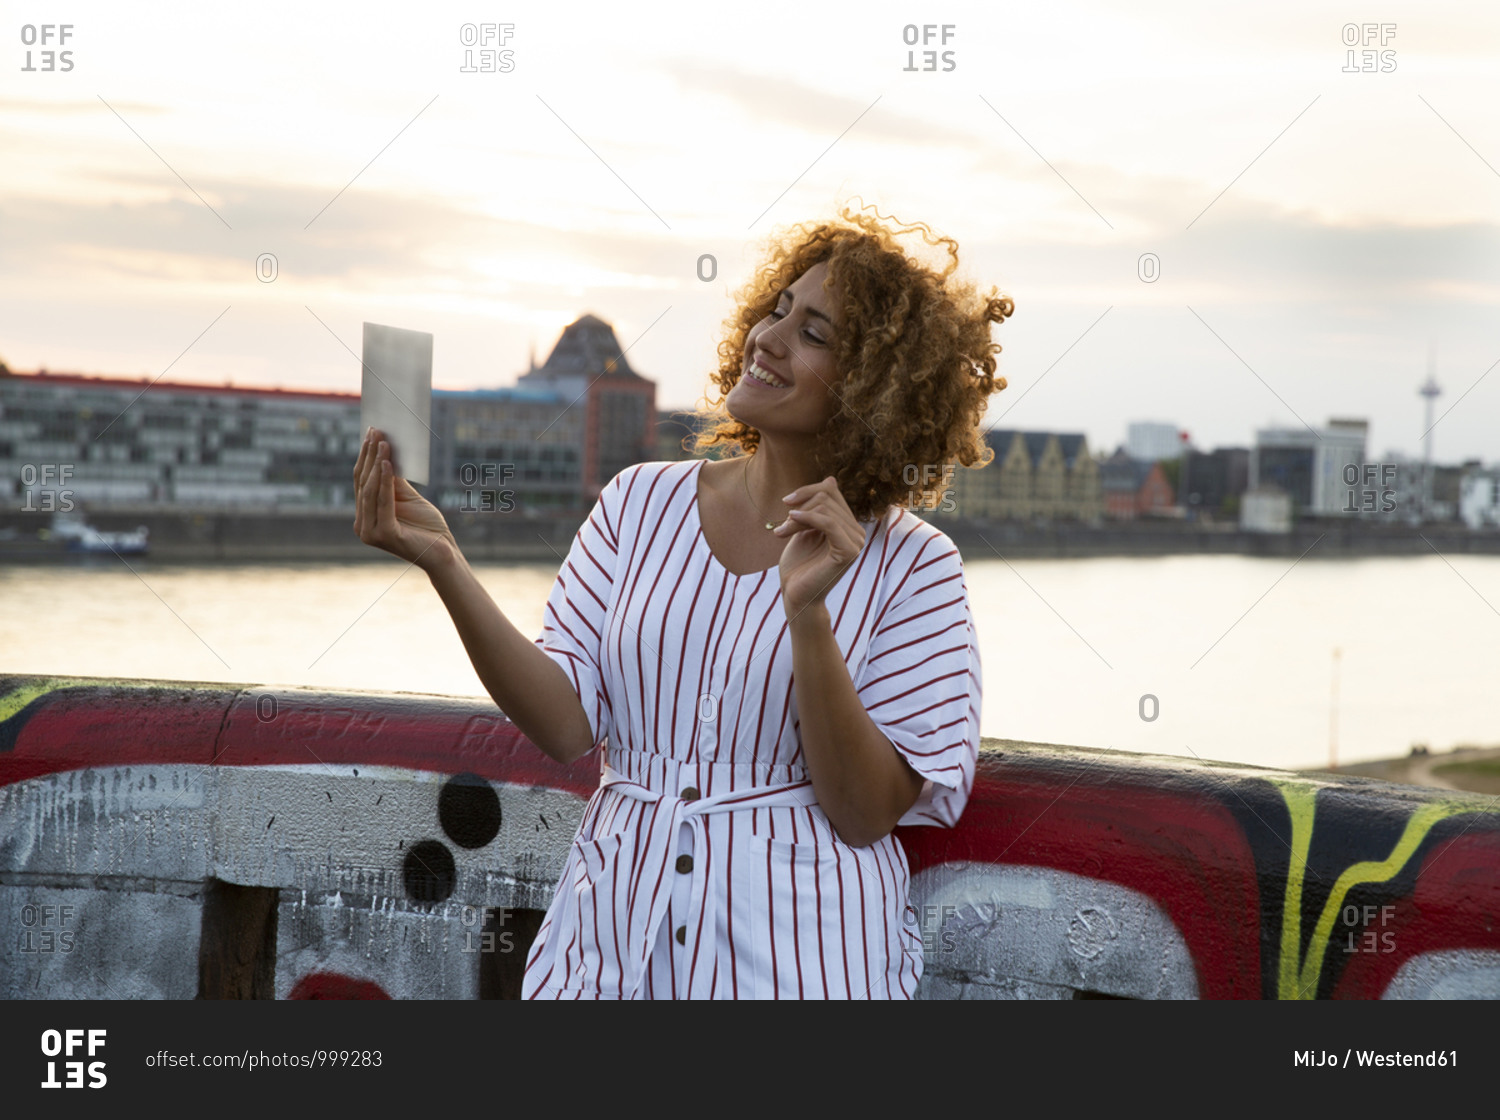 Smiling woman with curly hair holding digital tablet while standing against river in city at sunset